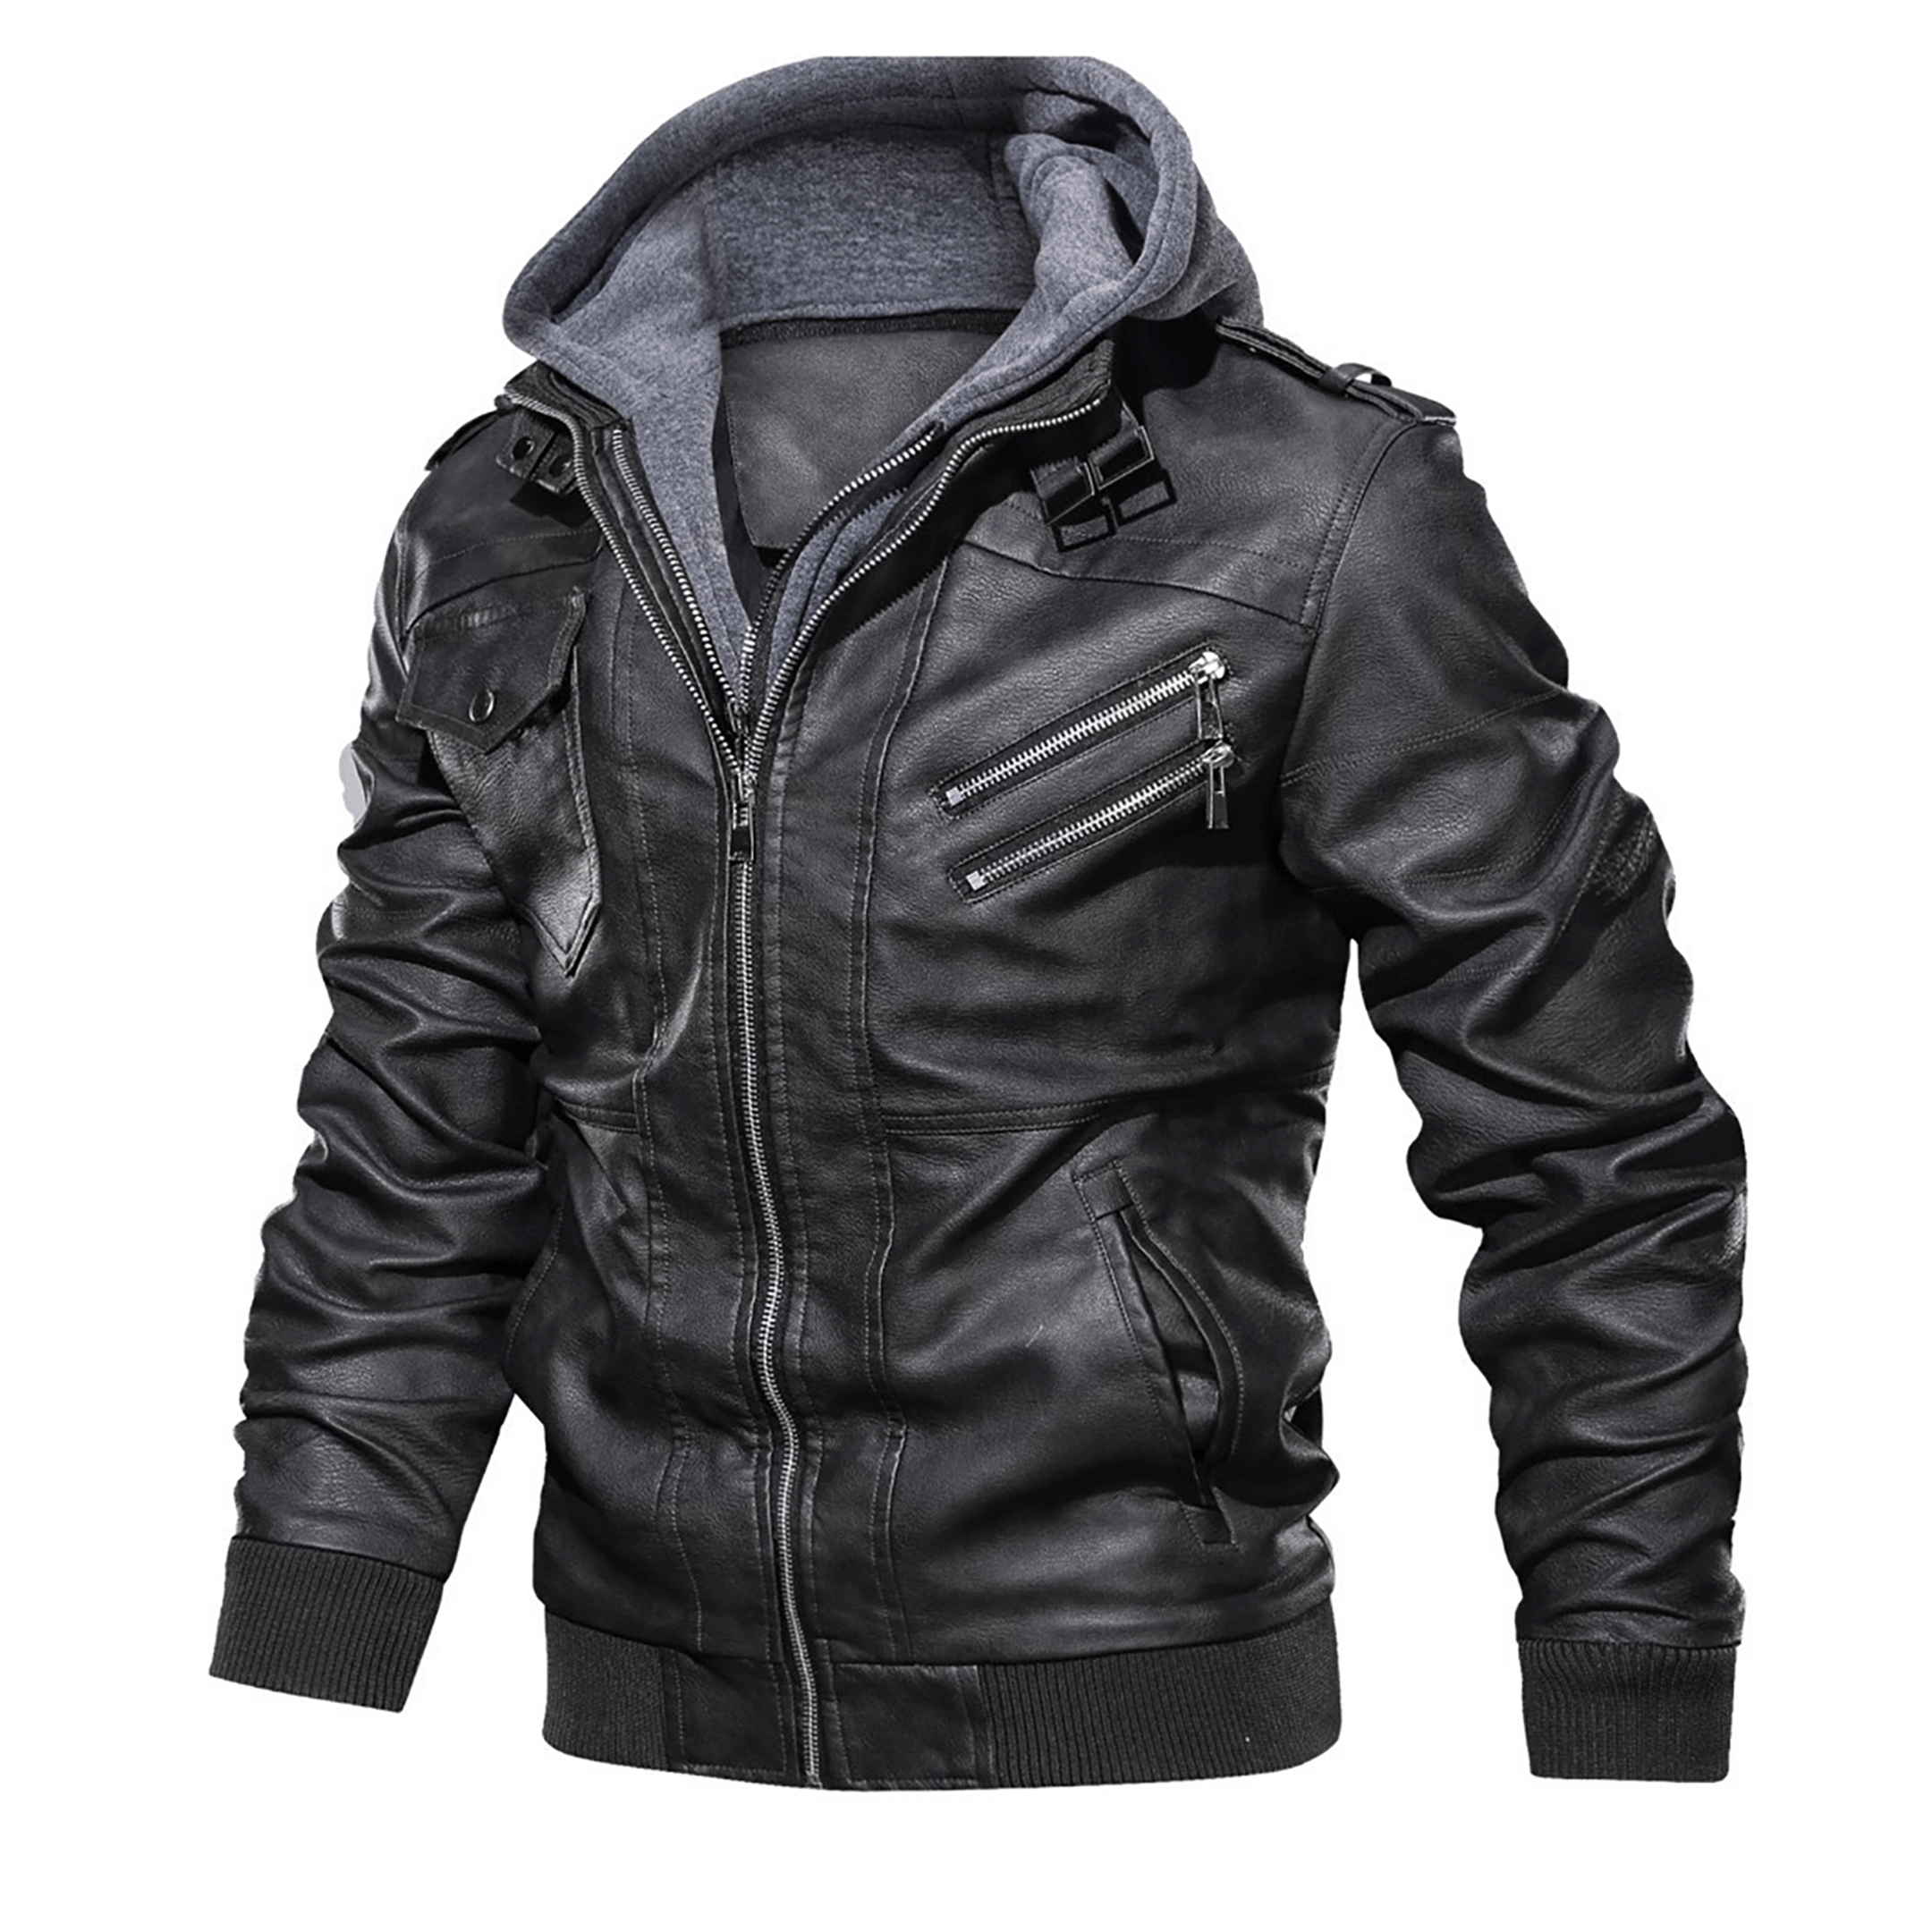 Top leather jackets and latest products 197